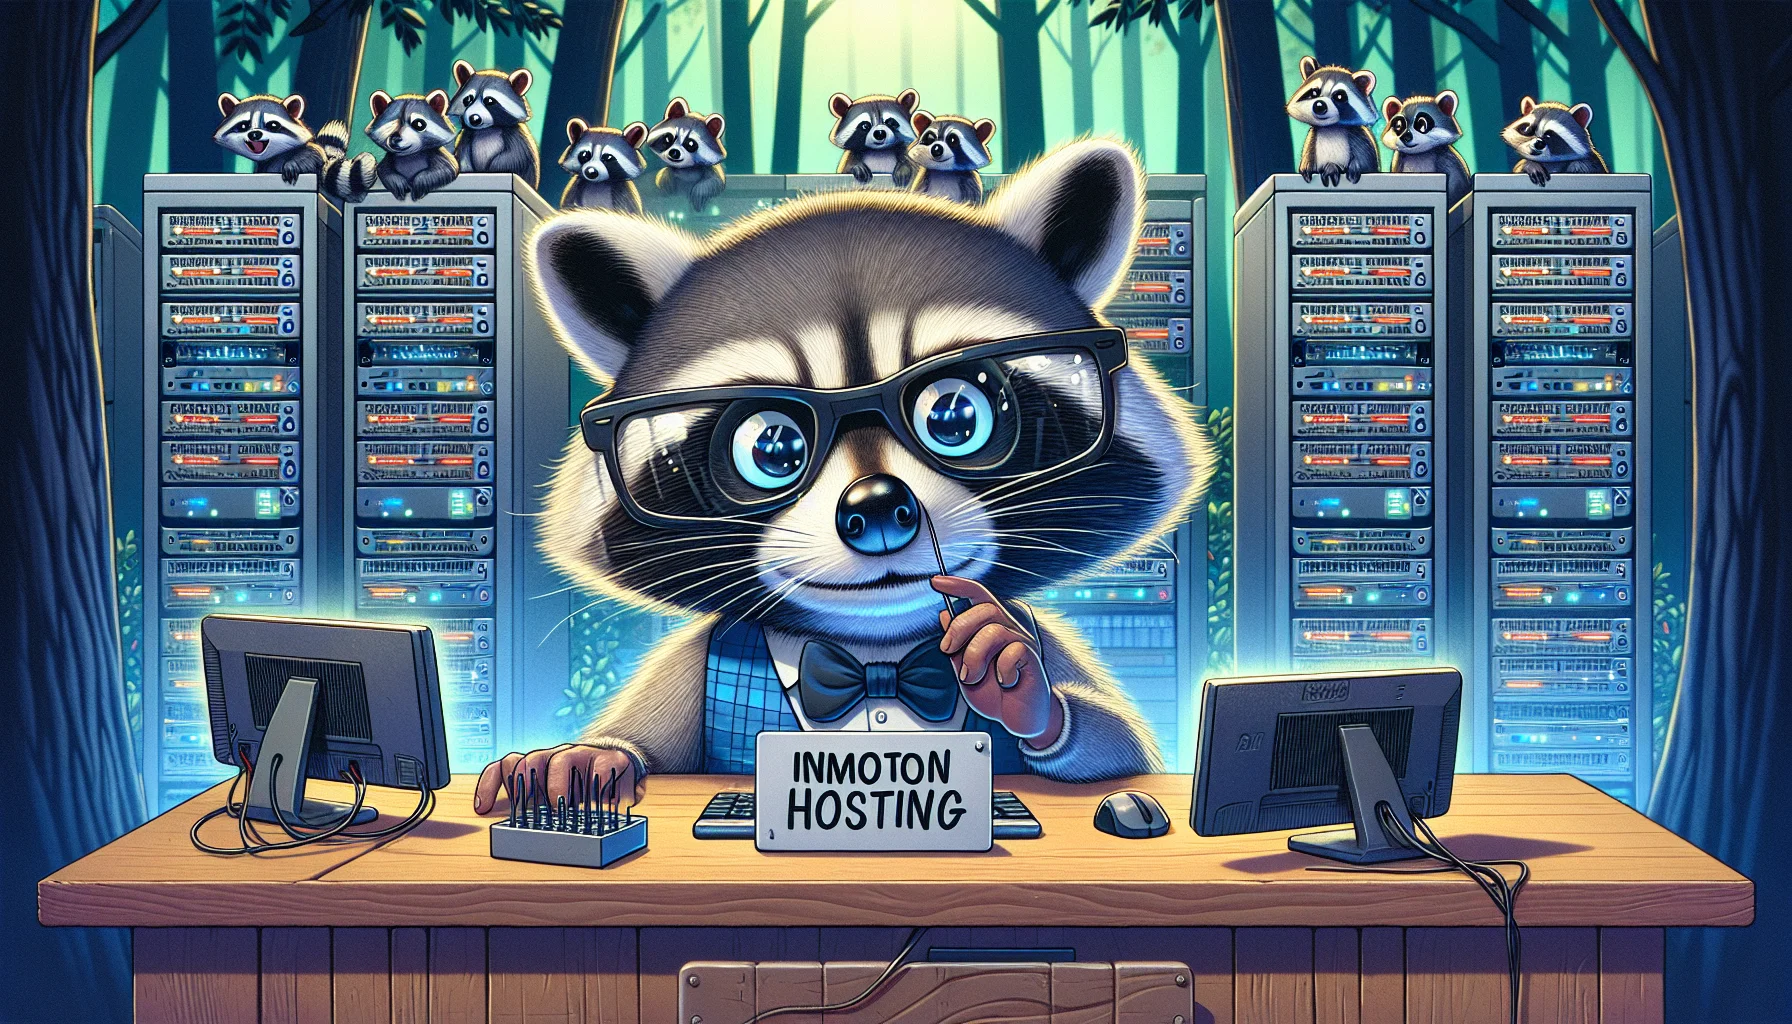 Create a humorous and engaging image depicting a fictional web hosting scenario. In the middle of the scene, there's a digital raccoon wearing thick glasses and a 'tech genius' hat. The raccoon sits behind a large desk full of tiny computer servers, all flashing and buzzing. The desk sign reads, 'InMotion Hosting'. In the background, digital forest animals gaze at the screen of their devices in amazement. Feel free to include lots of comic details that emphasize the smartness of our raccoon and the high-quality services of its web hosting company.